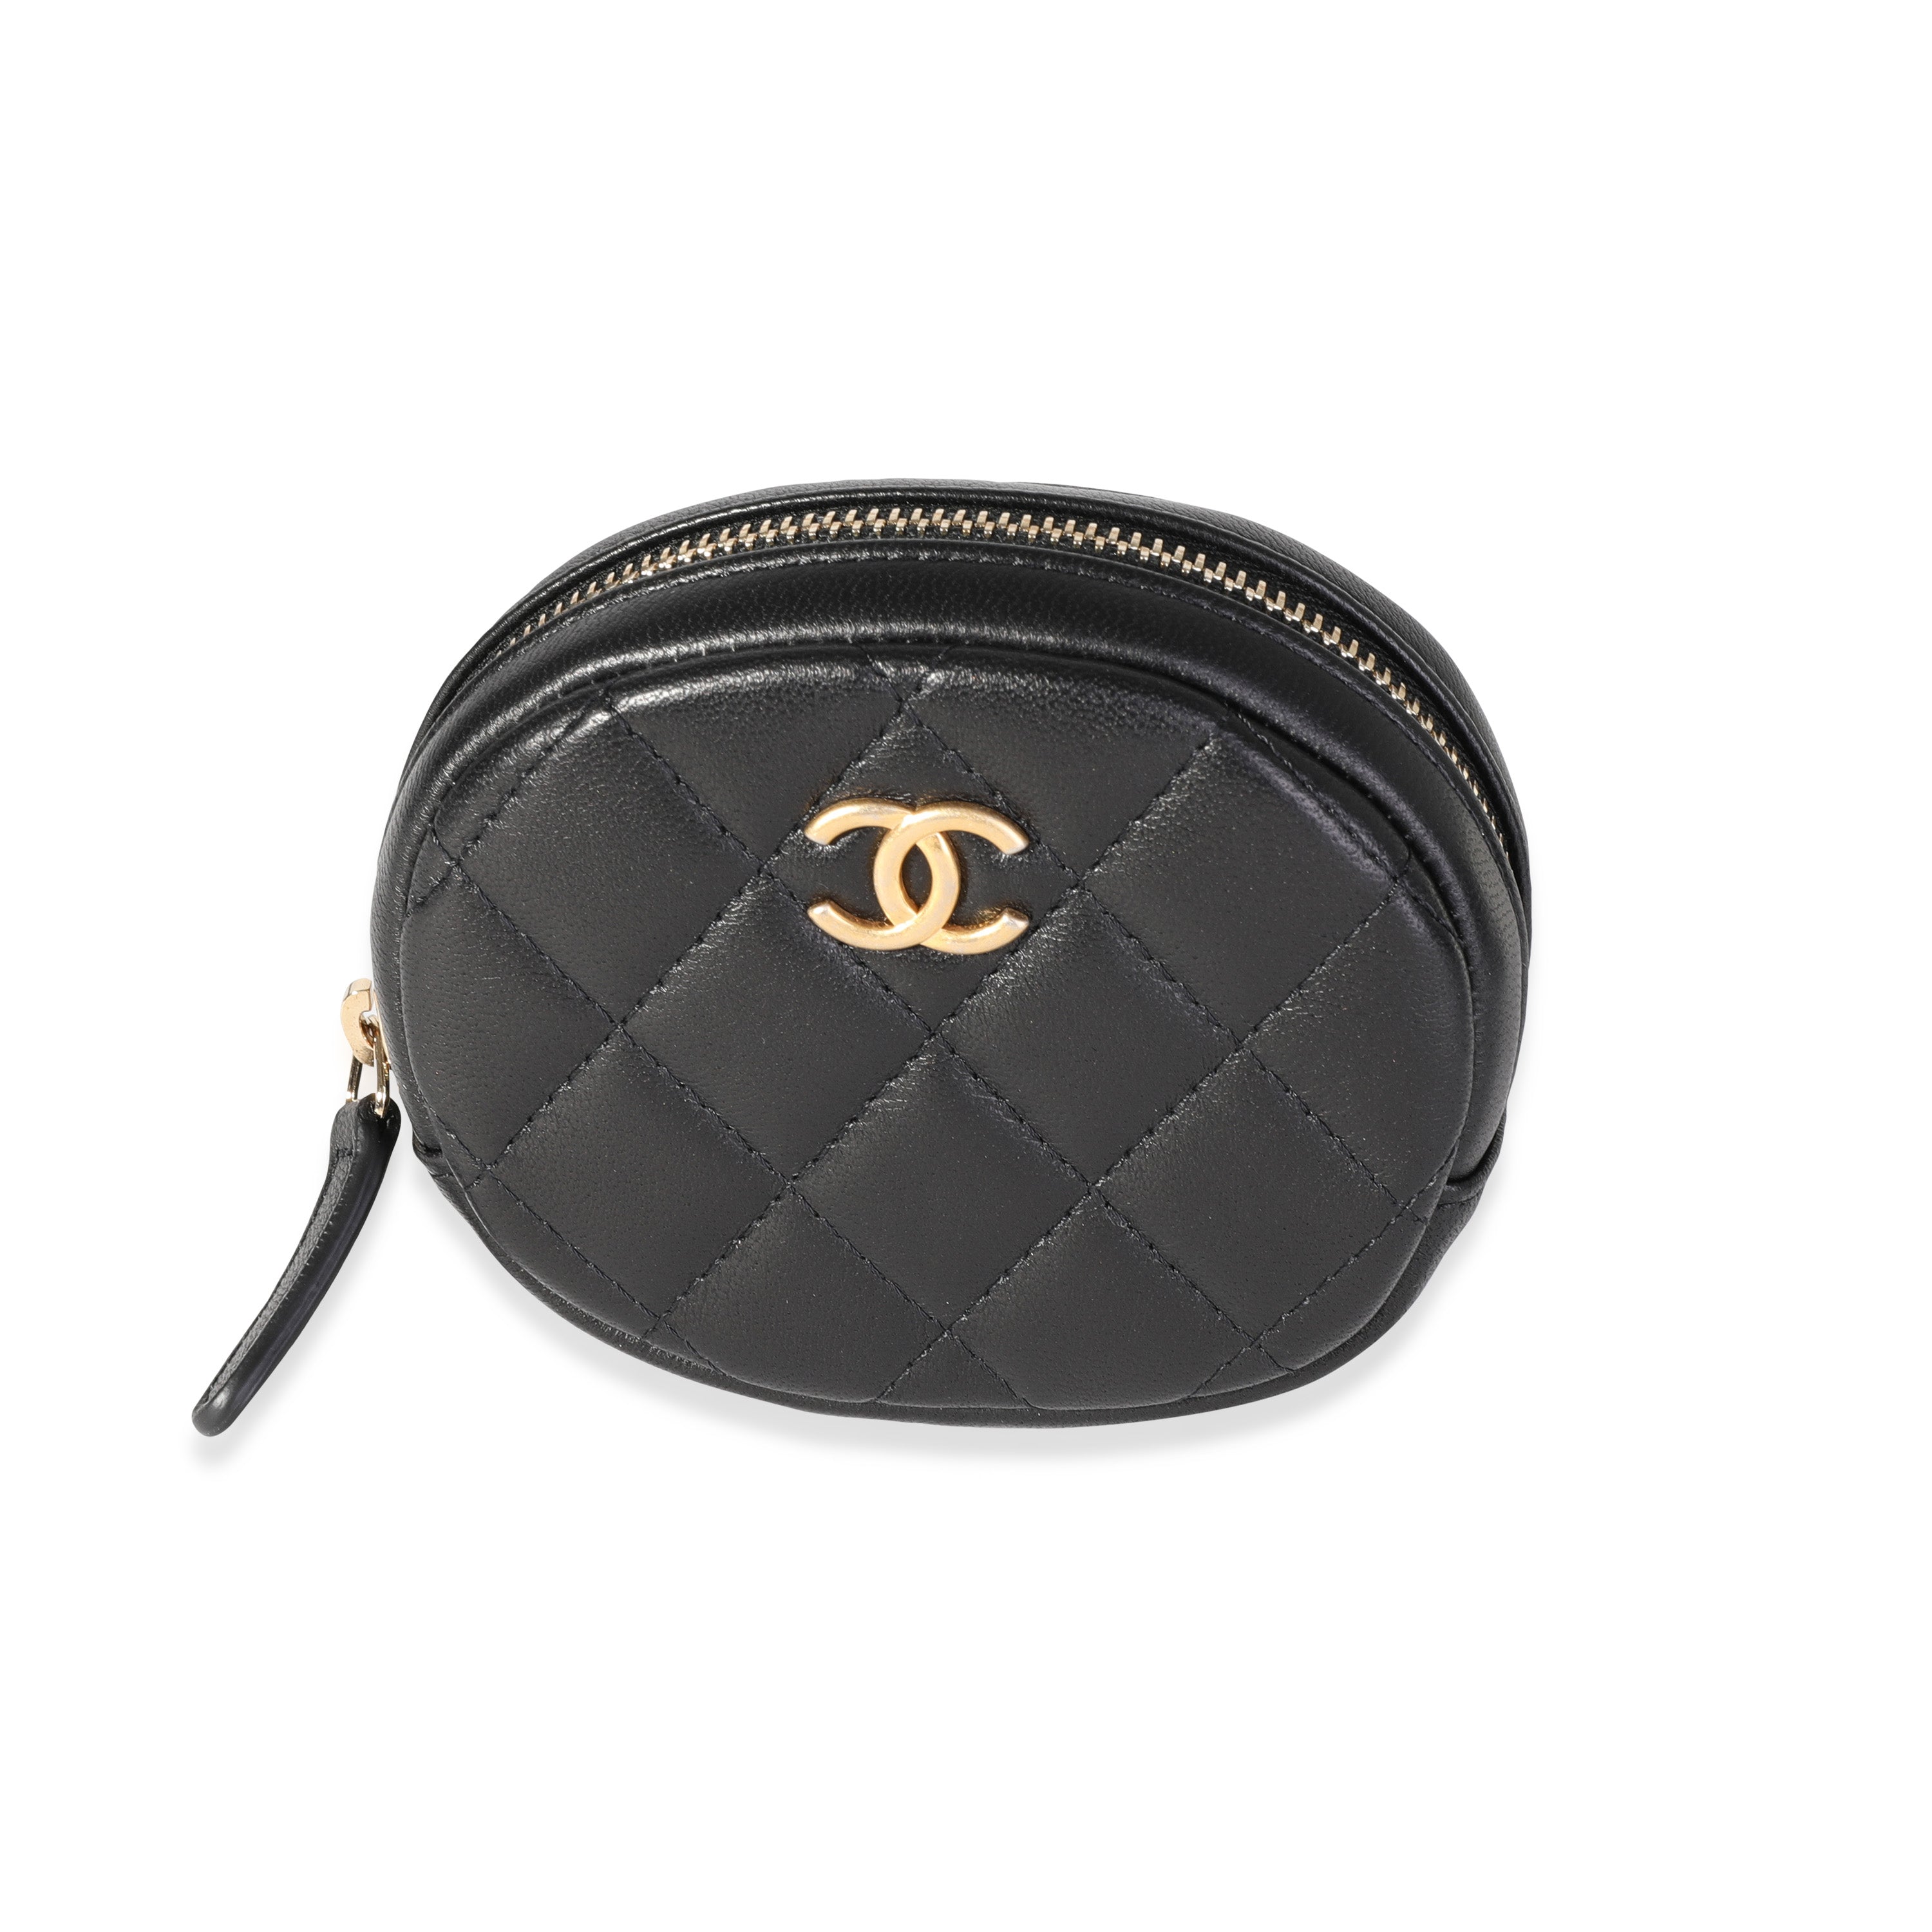 CHANEL Black Lambskin Quilted Inside Graffiti Coin Purse